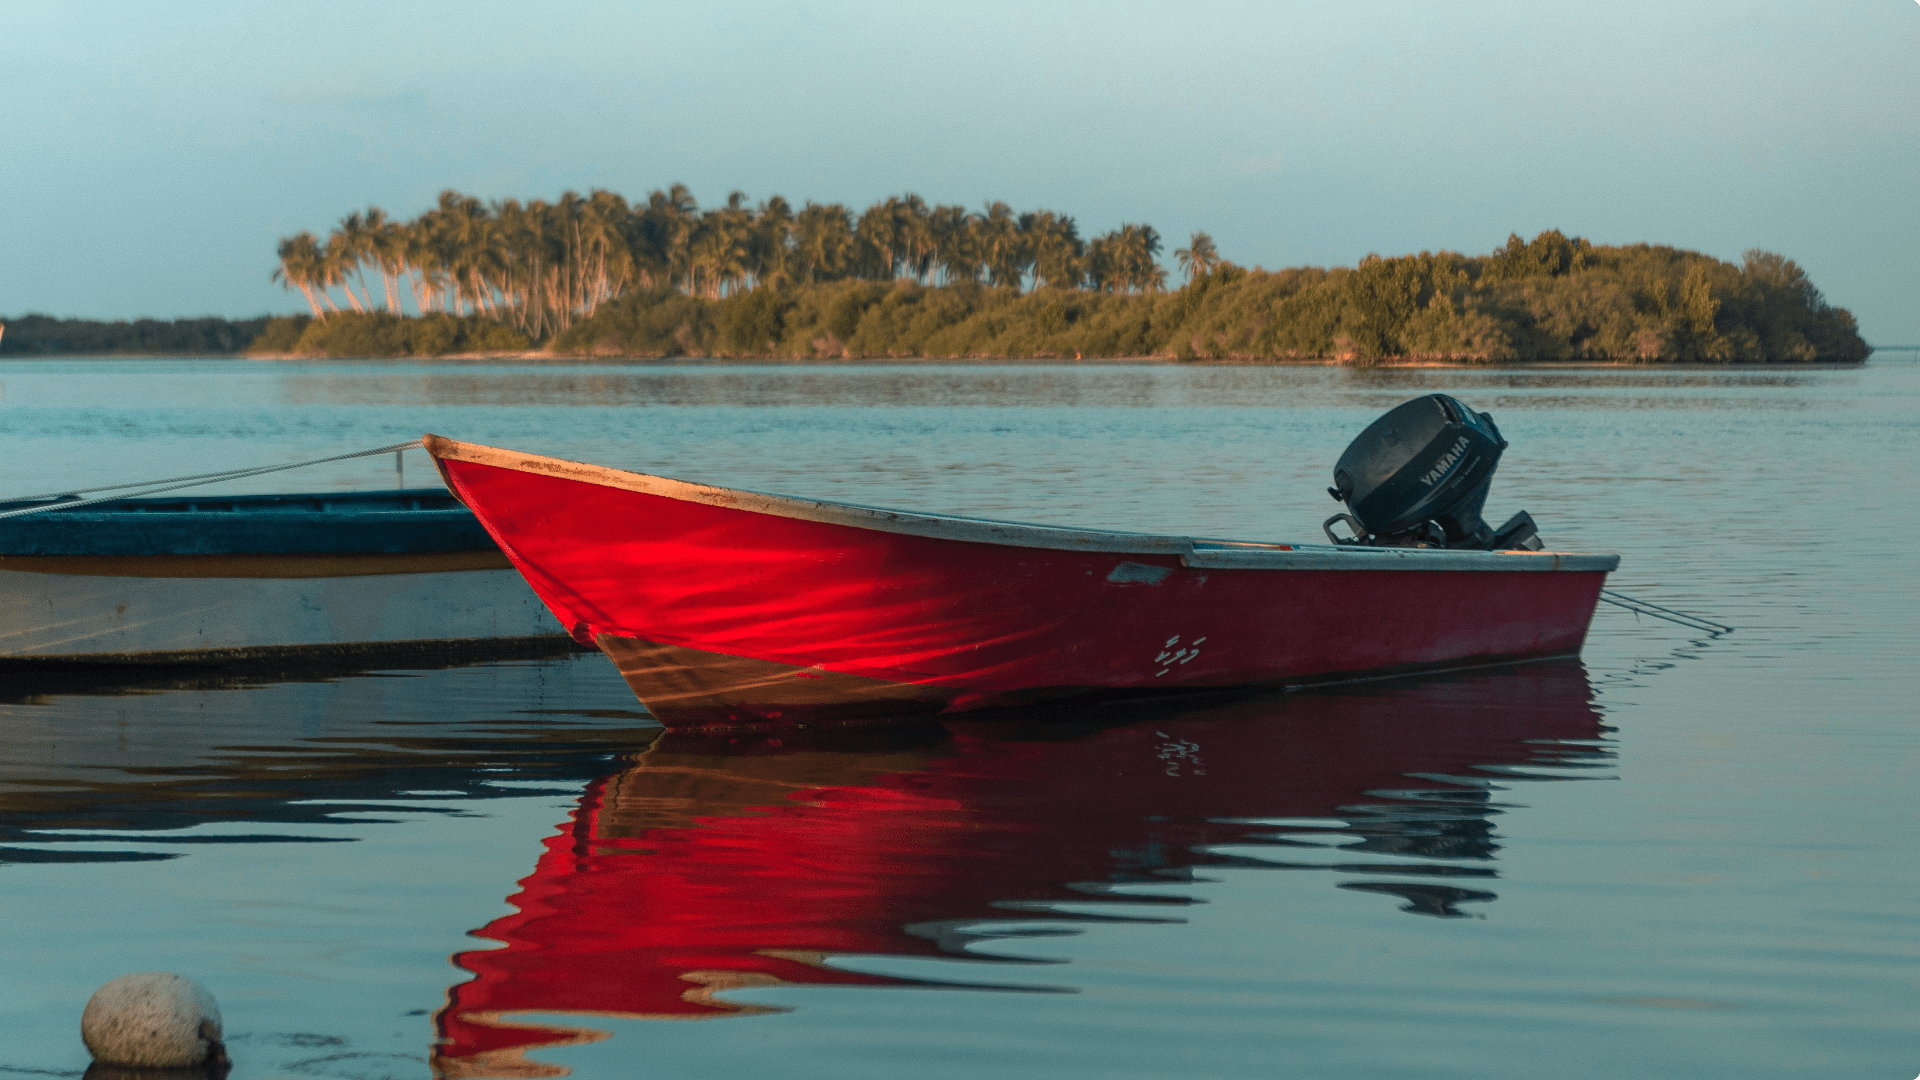 Photograph of a red boat on the lake